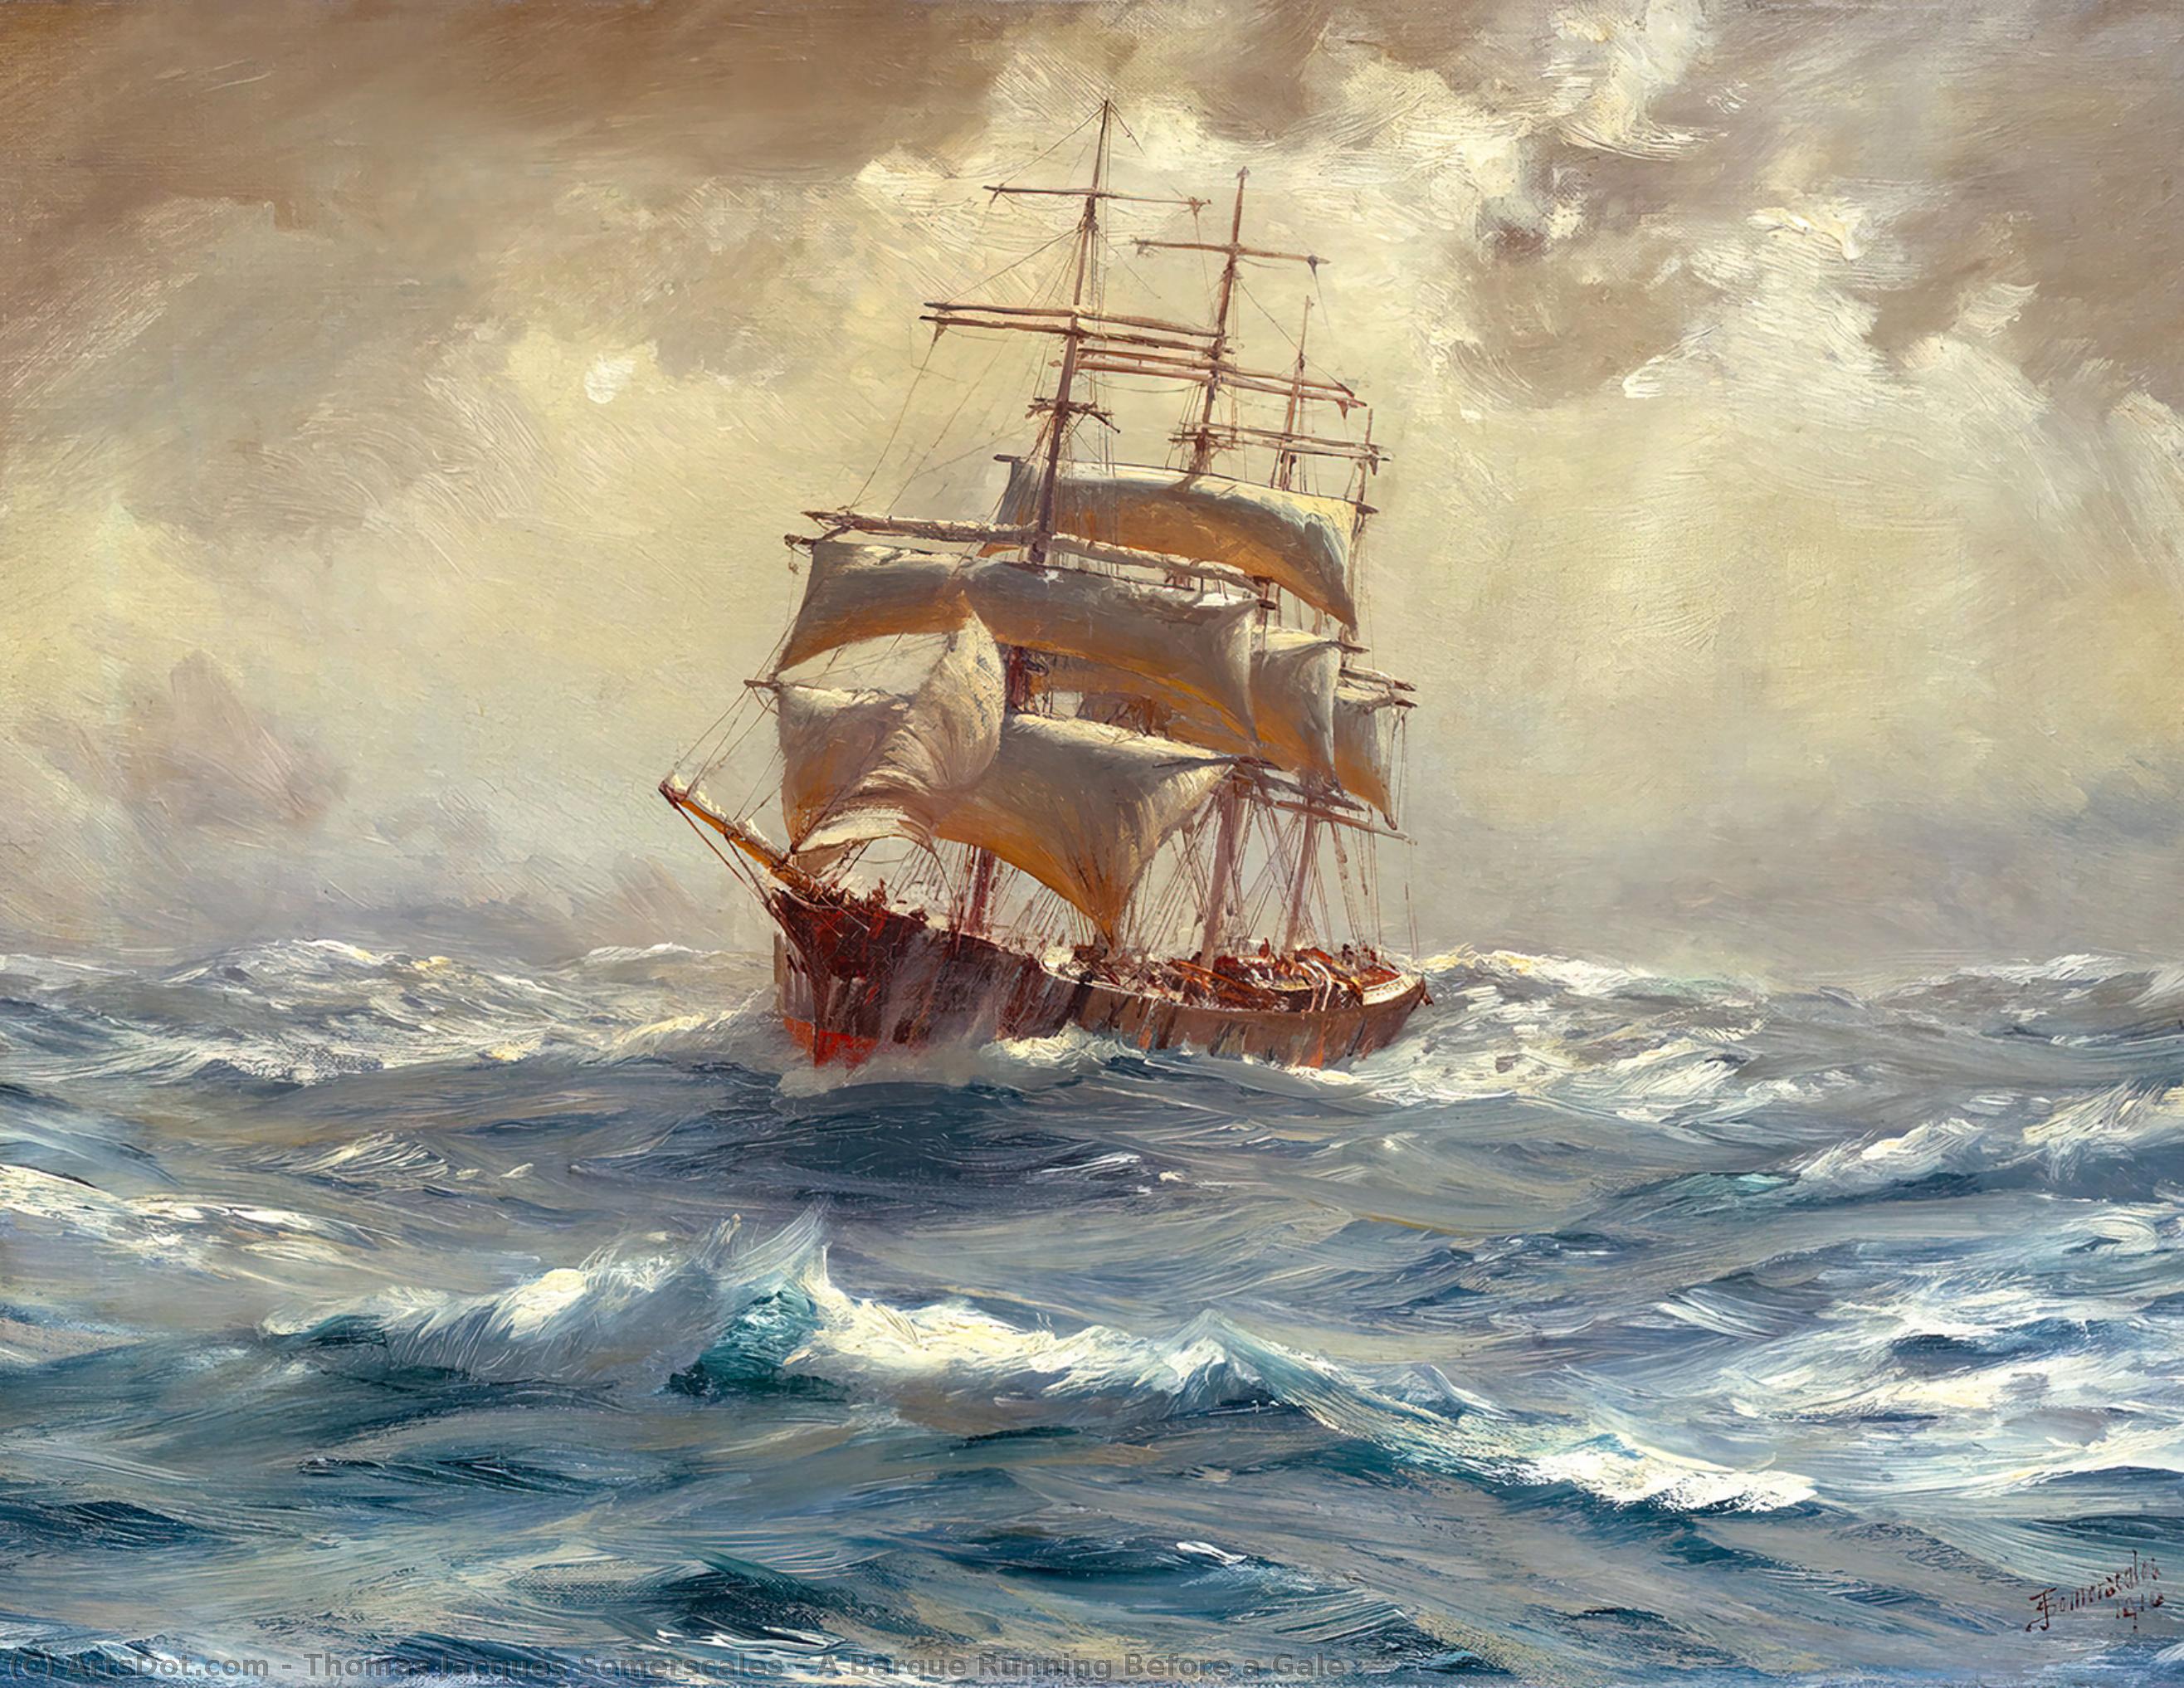 WikiOO.org - Güzel Sanatlar Ansiklopedisi - Resim, Resimler Thomas Jacques Somerscales - A Barque Running Before a Gale